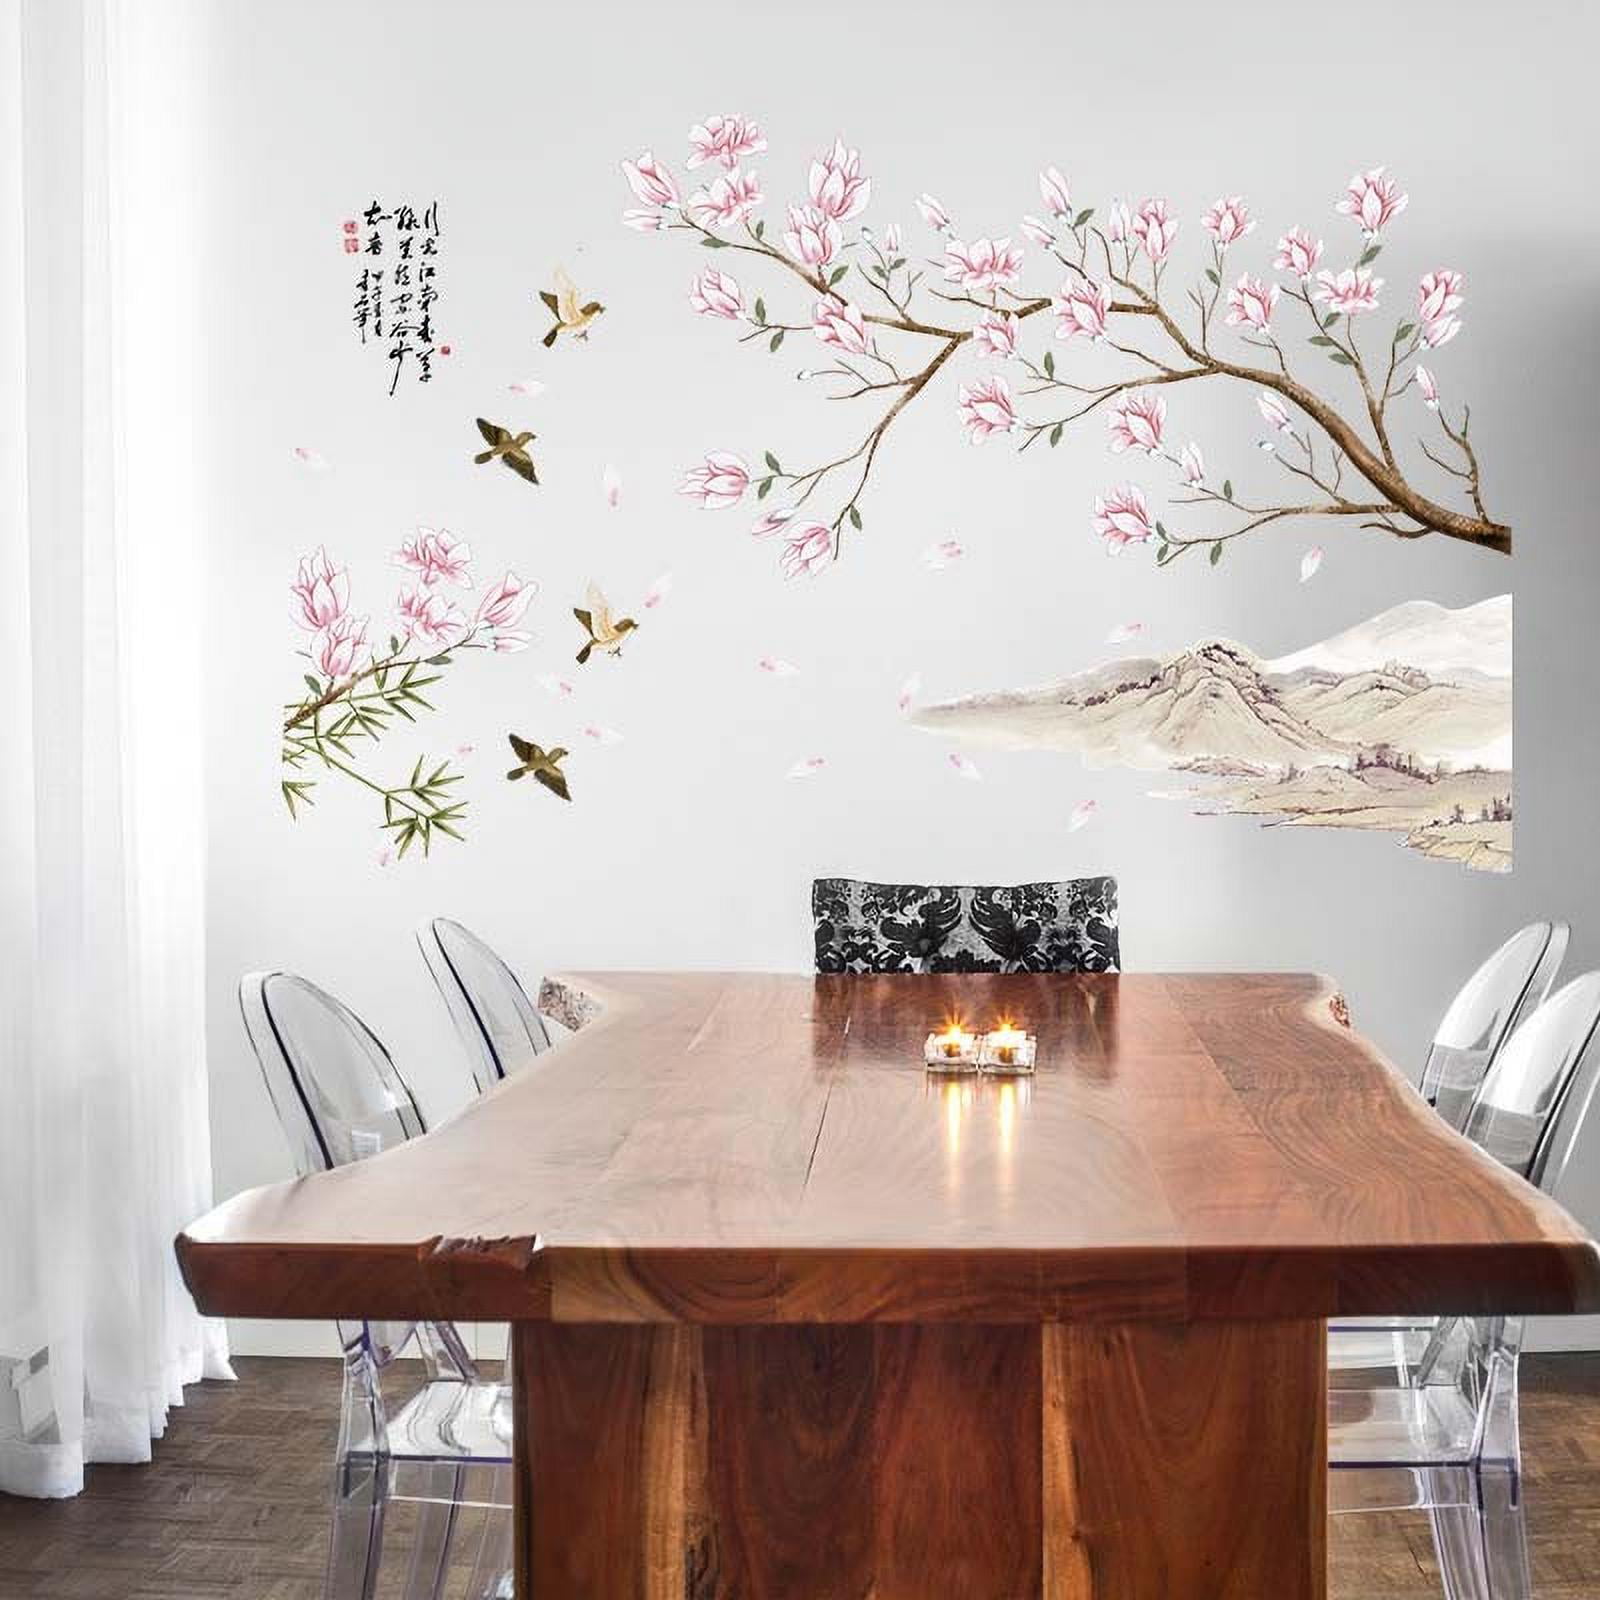 Waterproof Removable Vinyl Art Peach Blossoms Home Wall Sticker Decal Decors